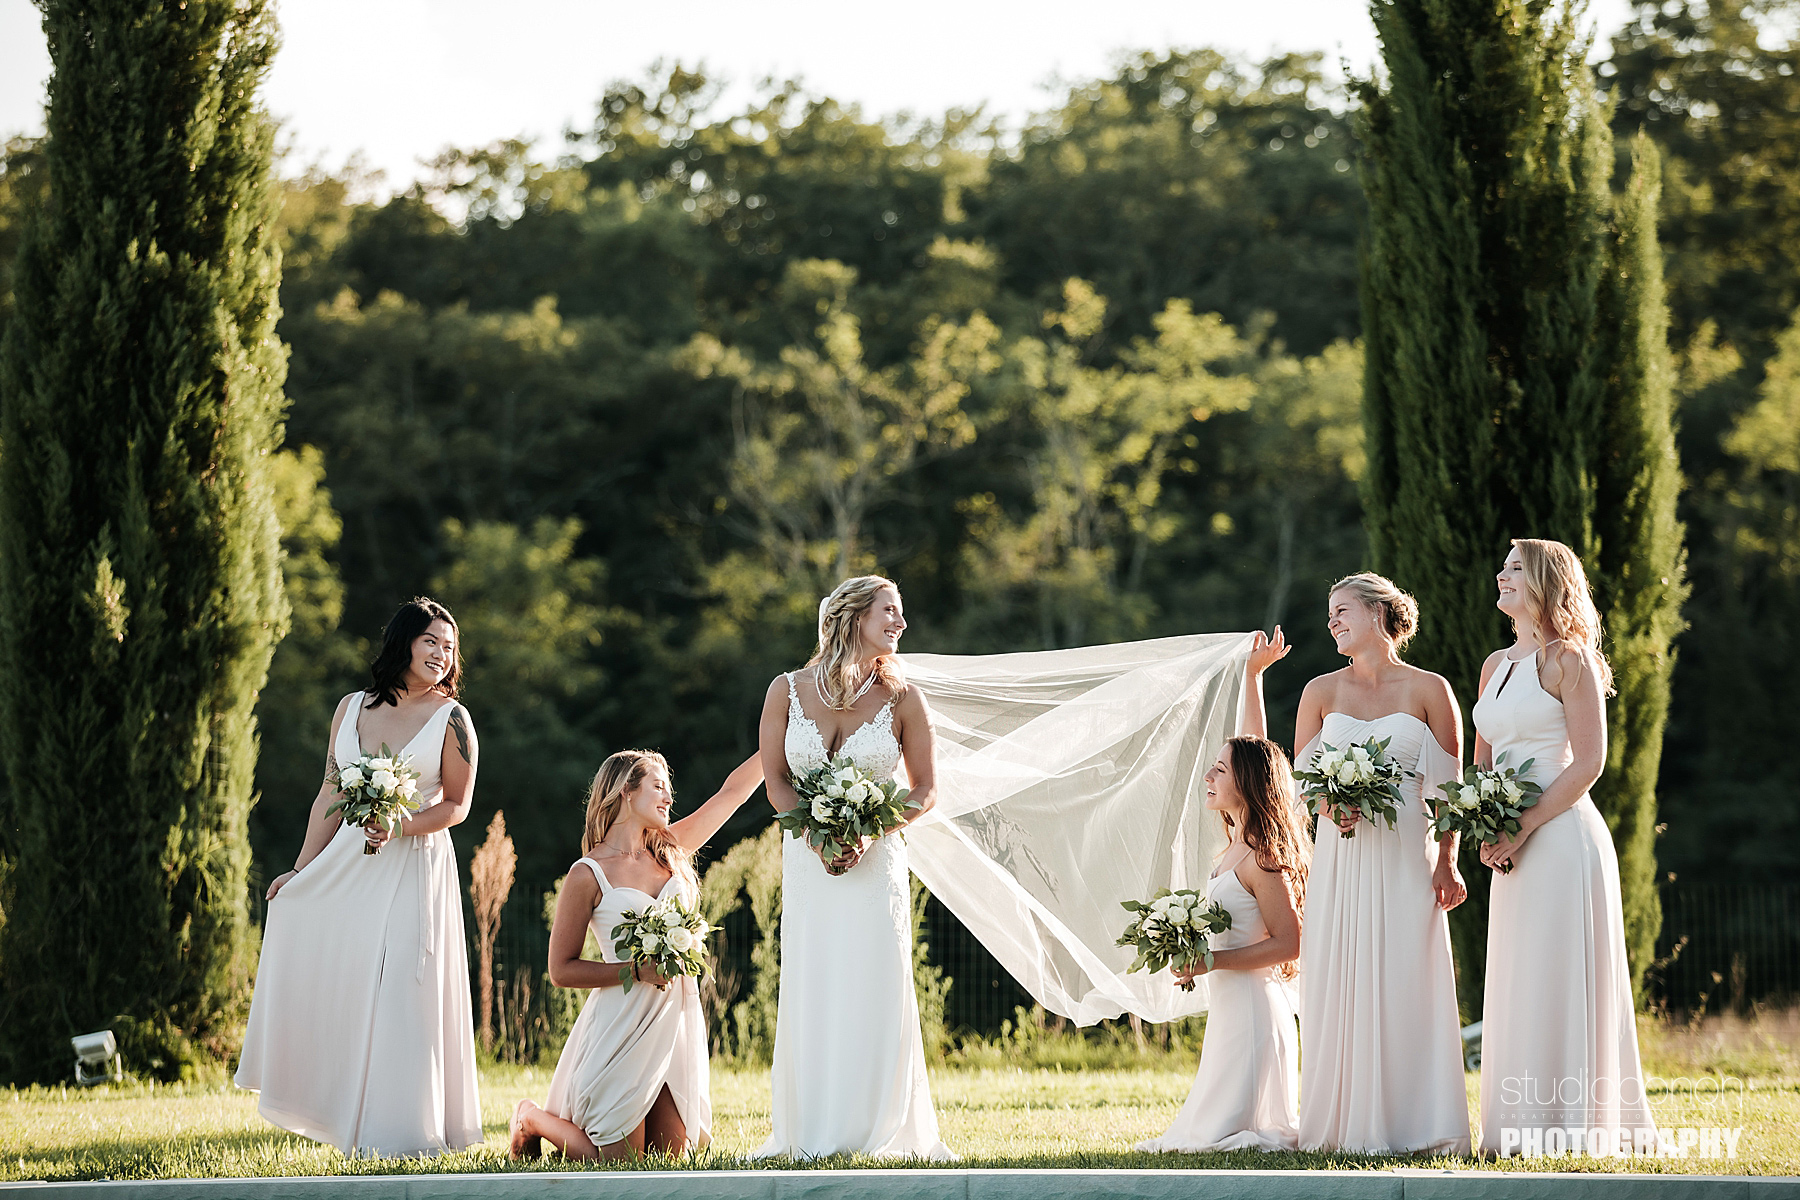 Country Wedding in Tuscany countryside at Tenuta Canto alla Moraia - Bridal Party - Photo by the wedding photographers in Tuscany based Florence Studio Bonon Photography.